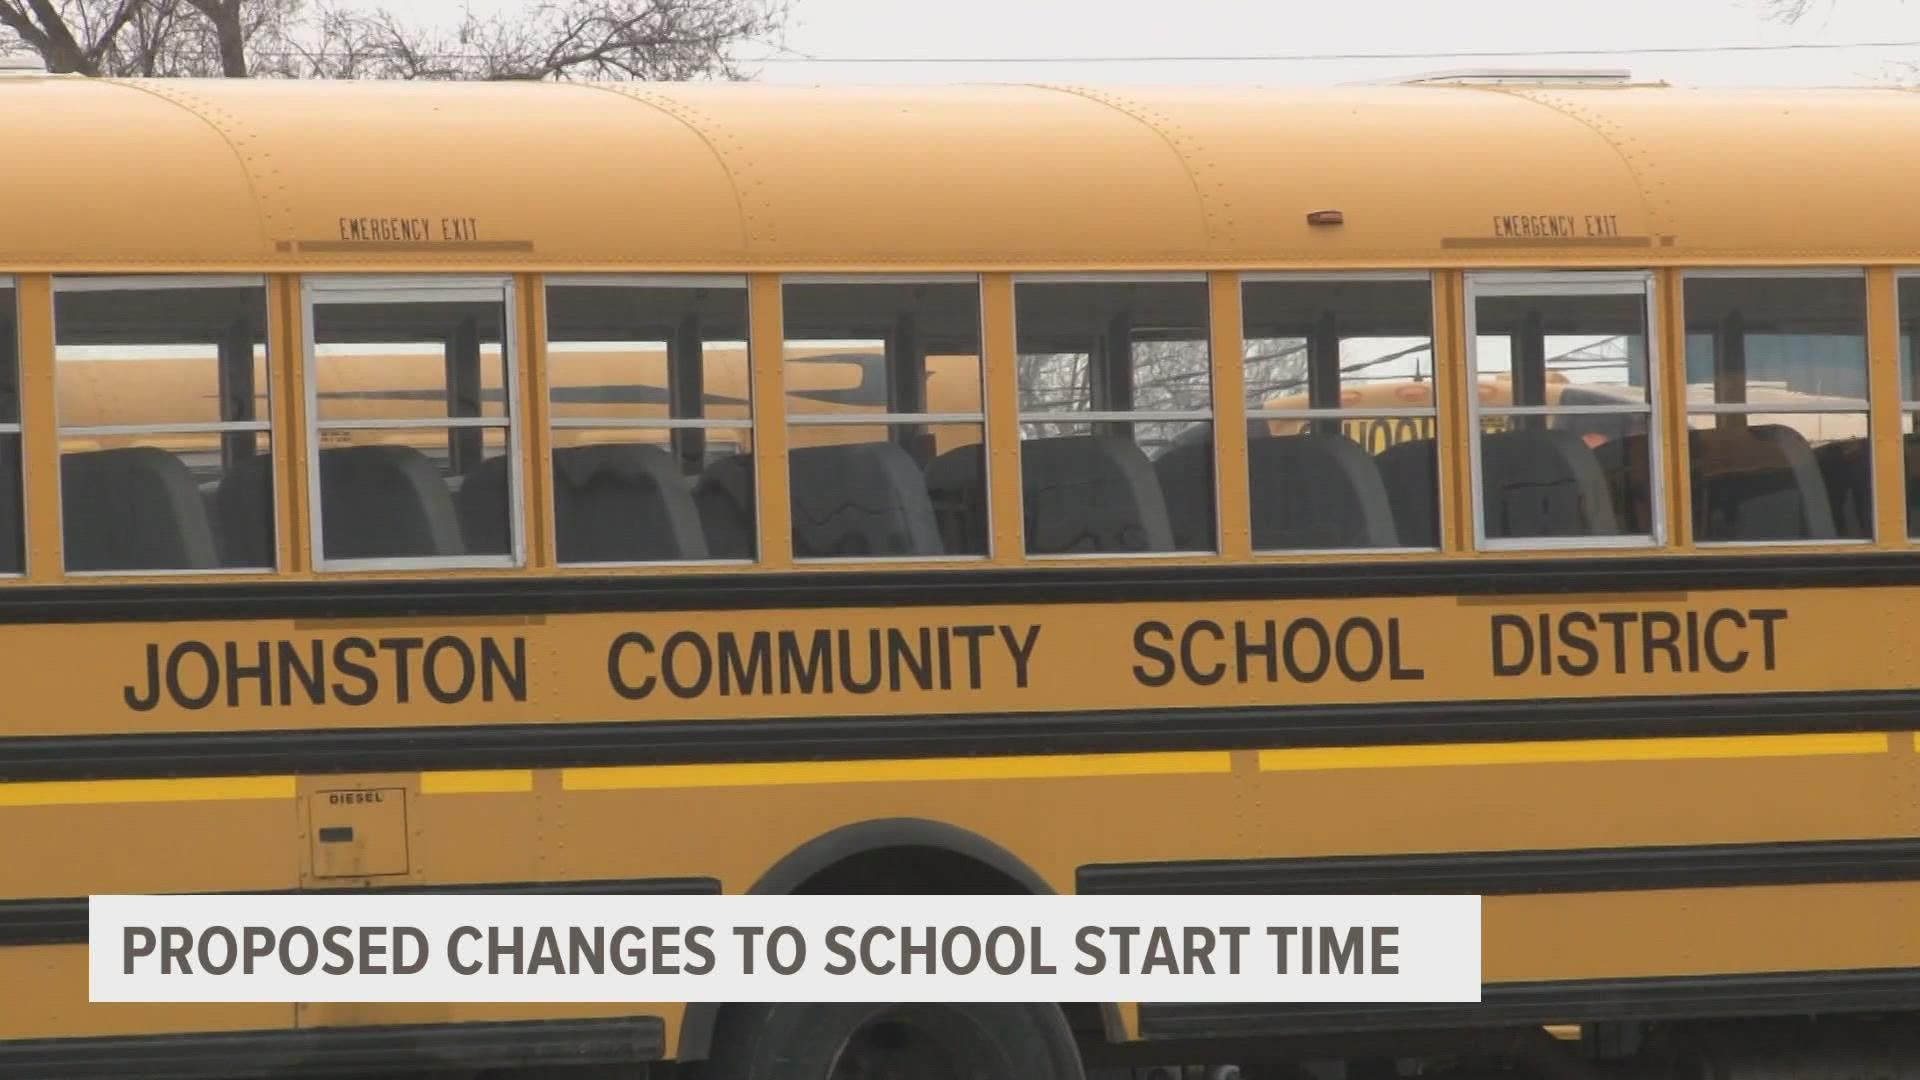 Johnston Community schools is proposing to change the times of schools, due to a shortage of bus drivers and not being able to get kids to school on time.